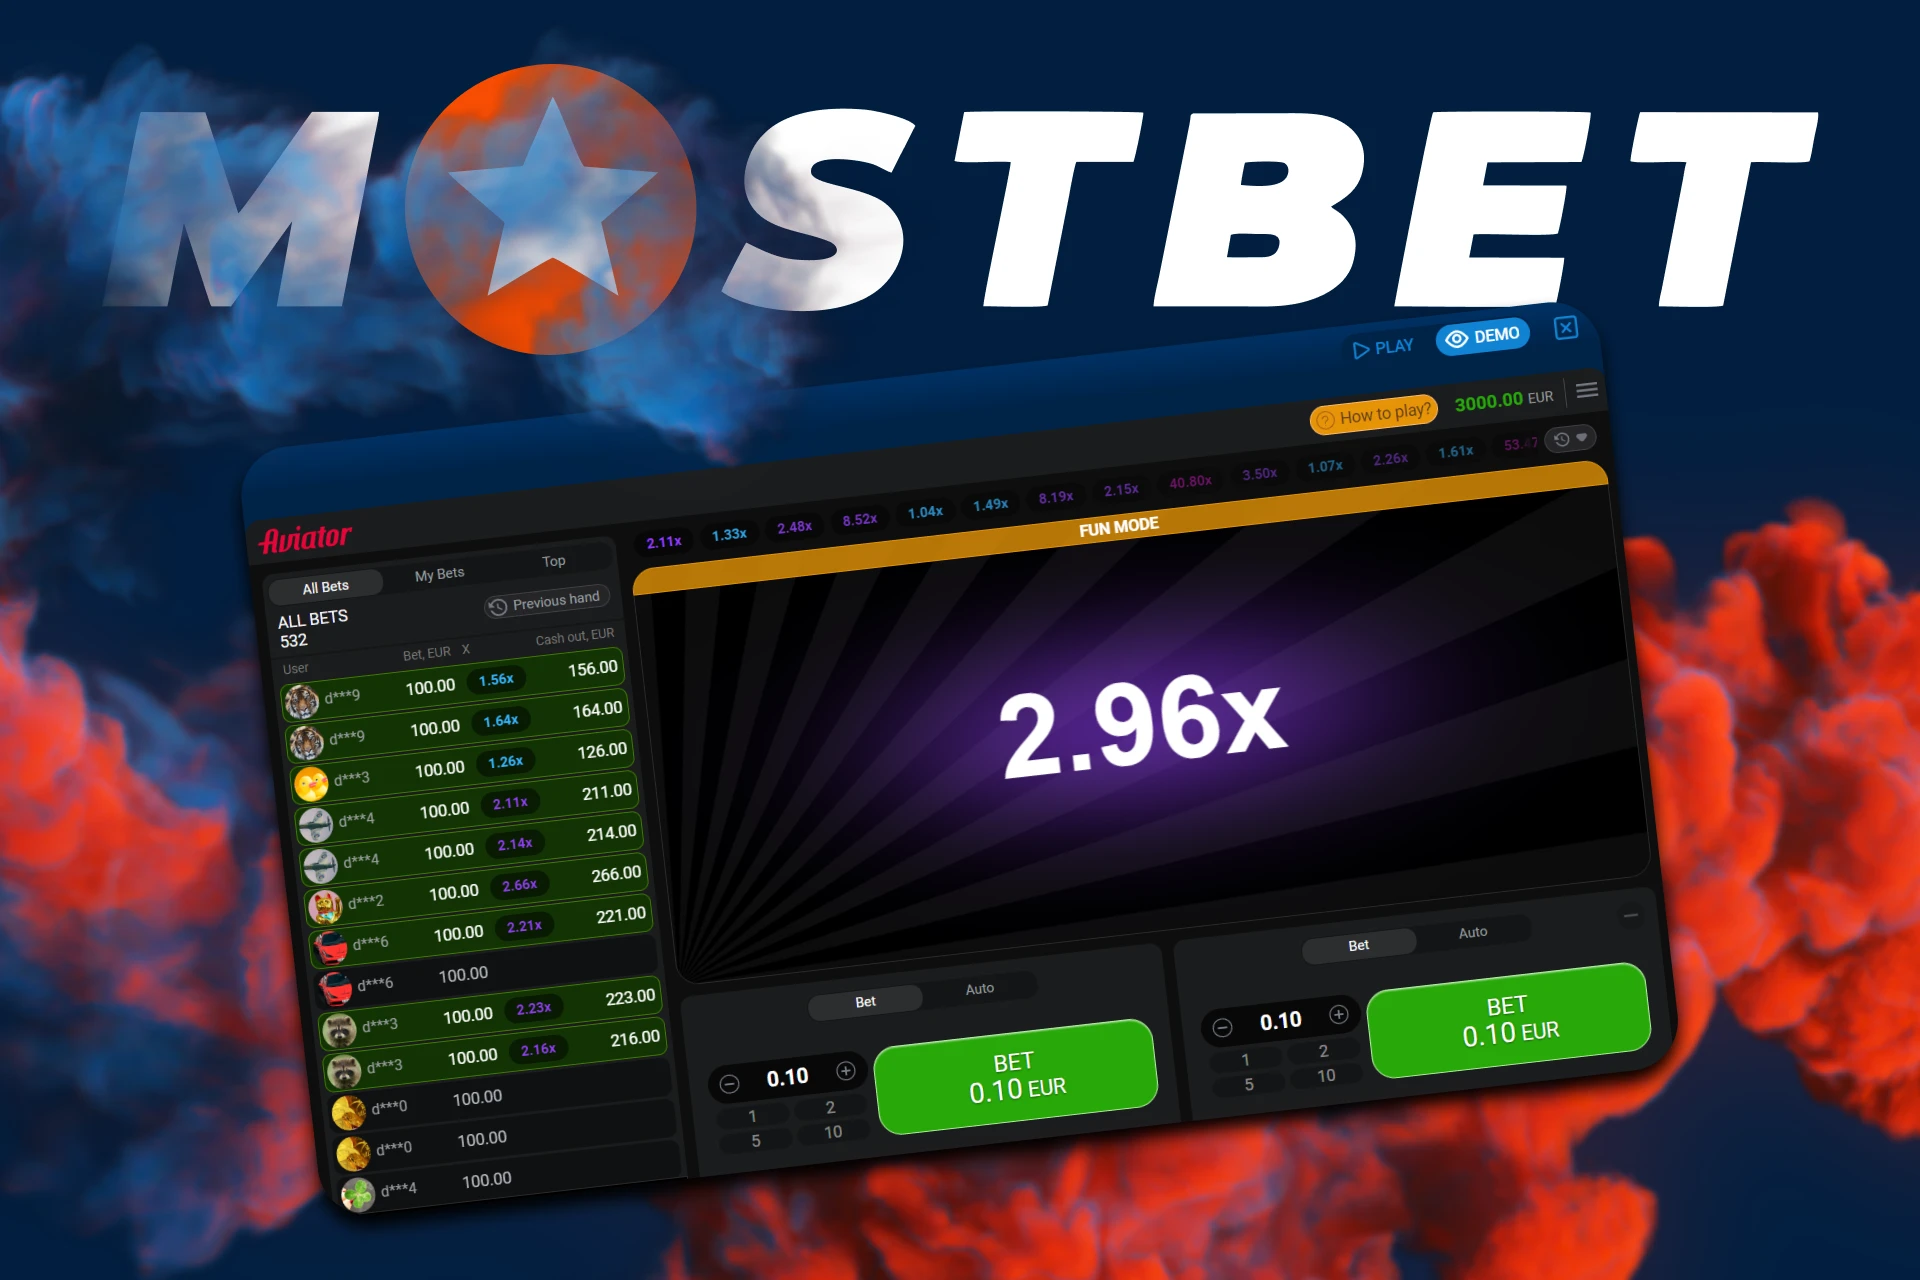 Are You Struggling With Bookmaker Mostbet and online casino in Kazakhstan? Let's Chat